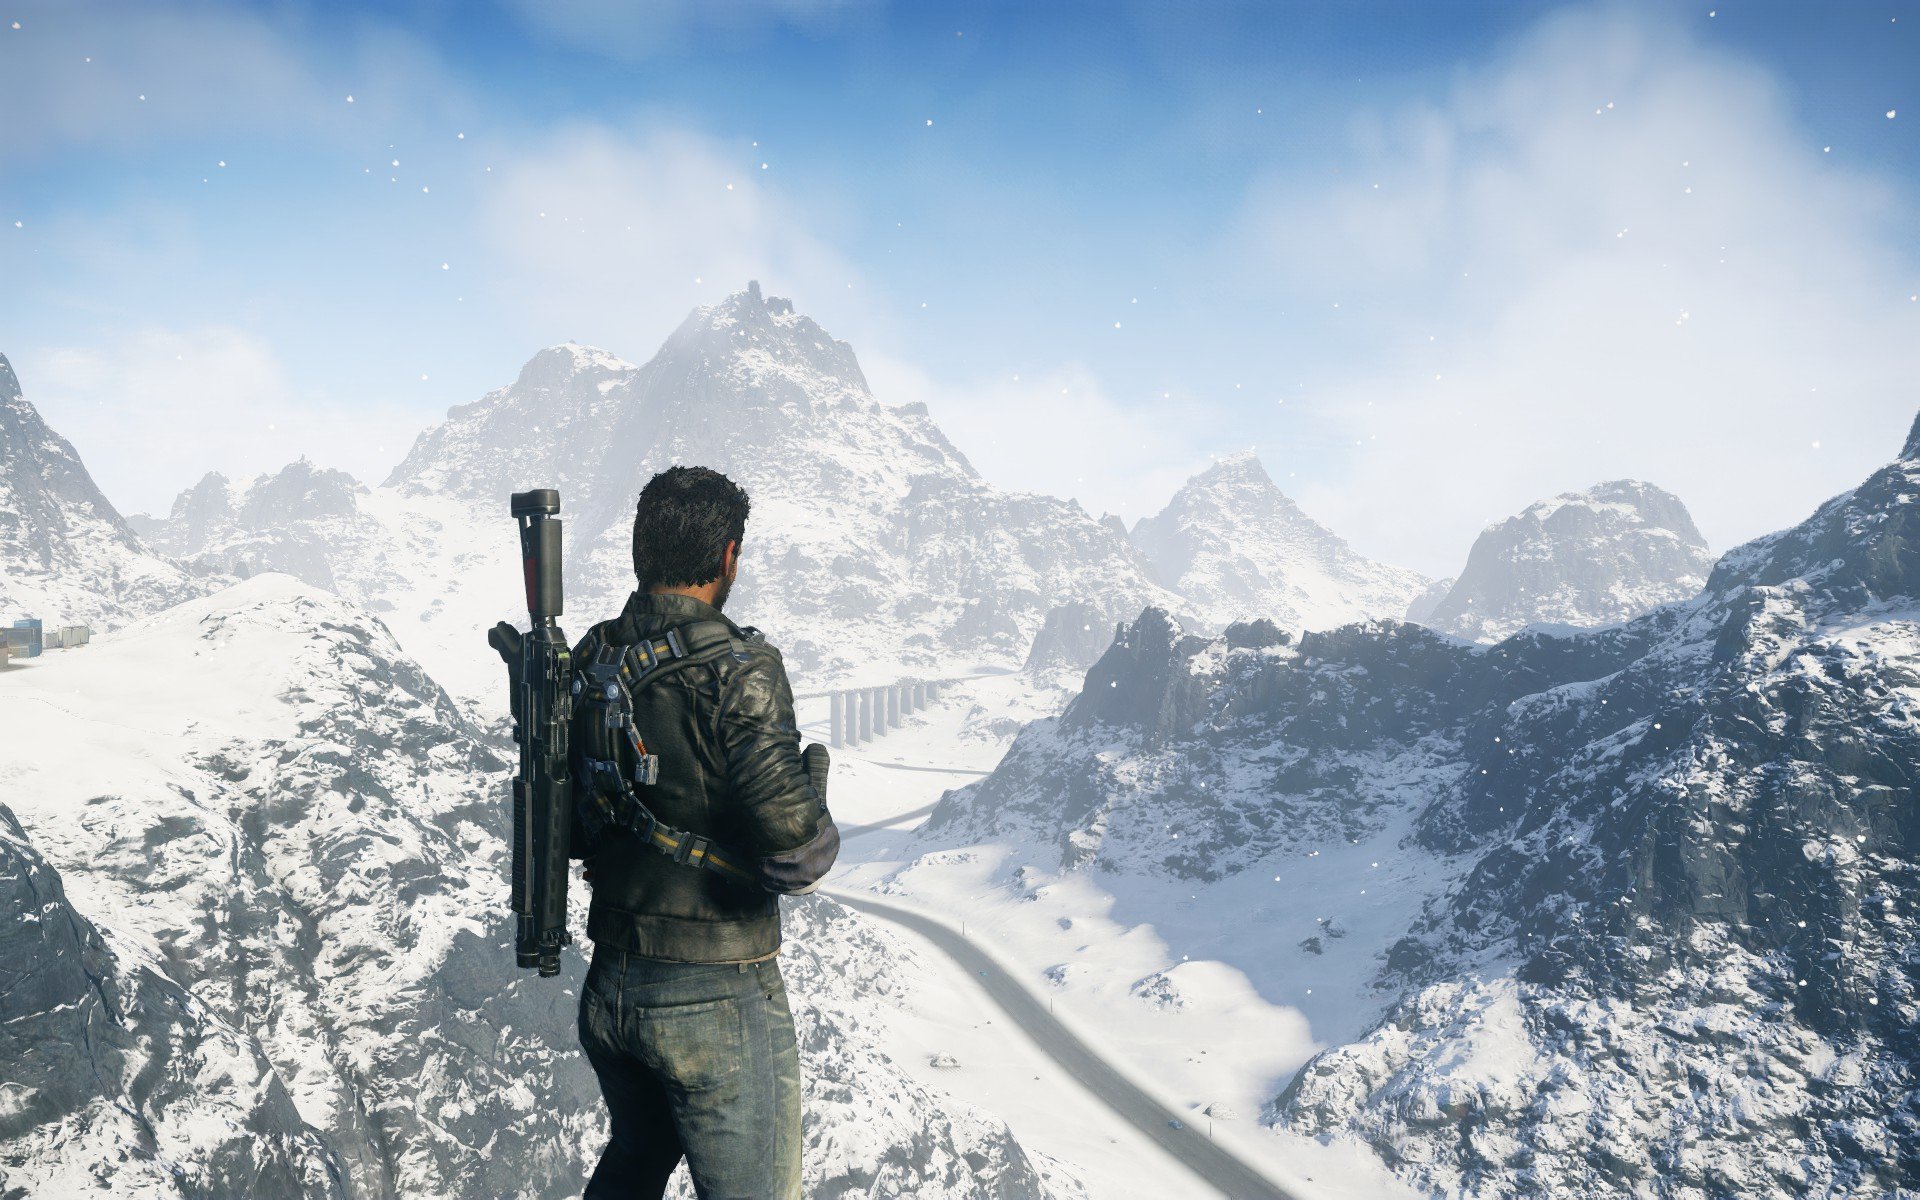 Just Cause 4 review: A chaotic and addictive open world experience ...